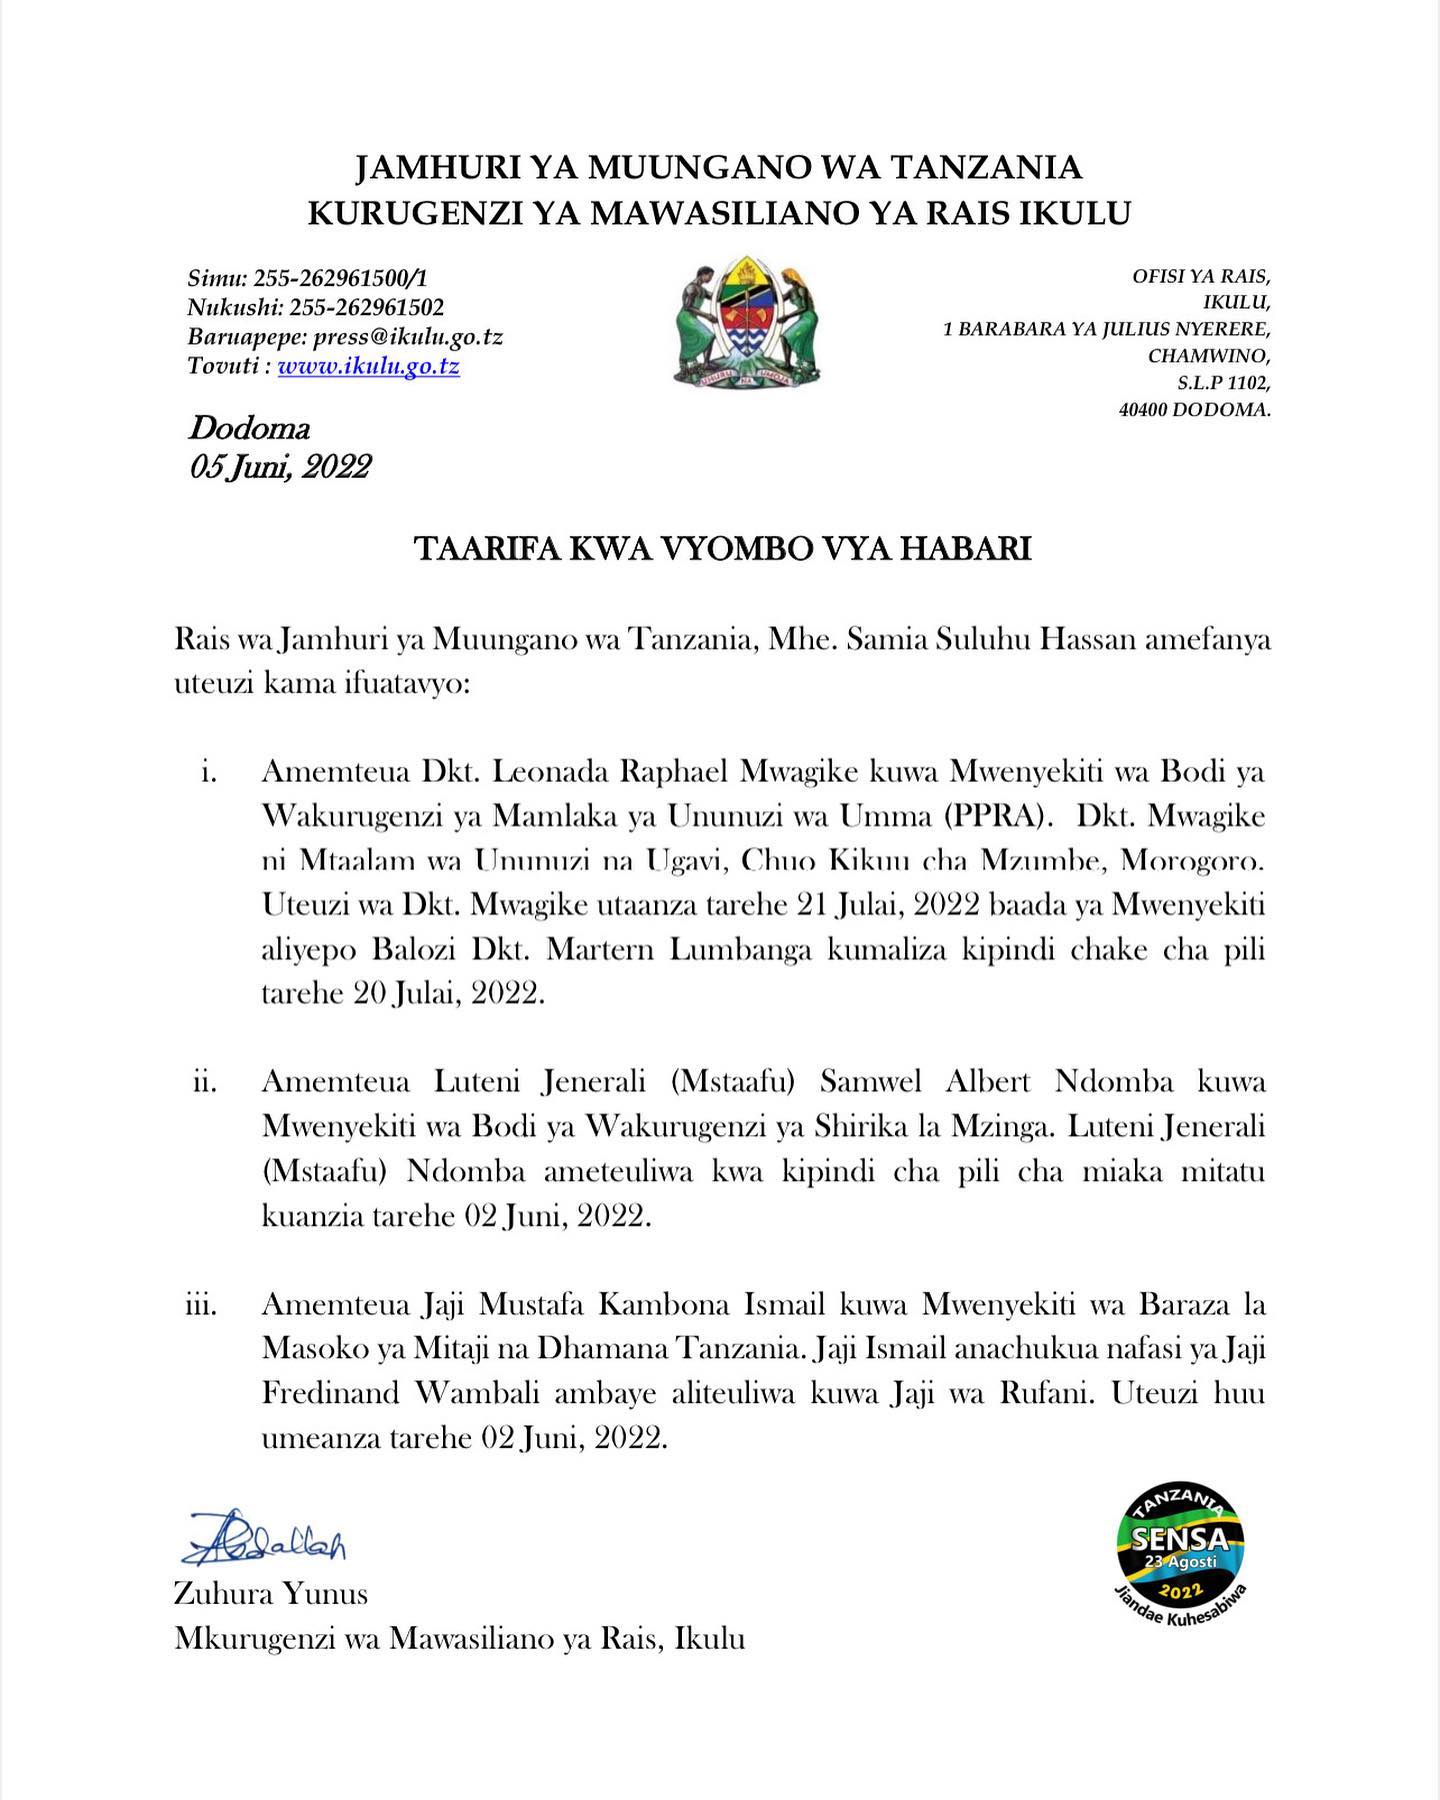 Photo_by_Ikulu_Tanzania_on_June_05,_2022._May_be_an_image_of_text.